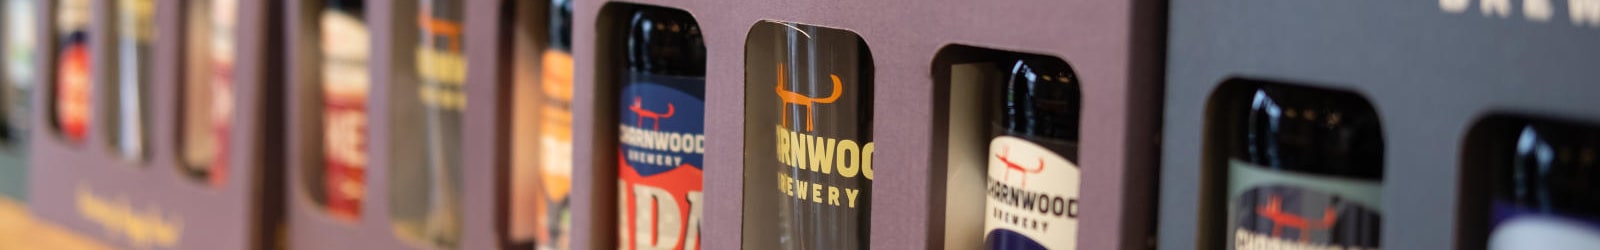 
Charnwood Brewery Banner
